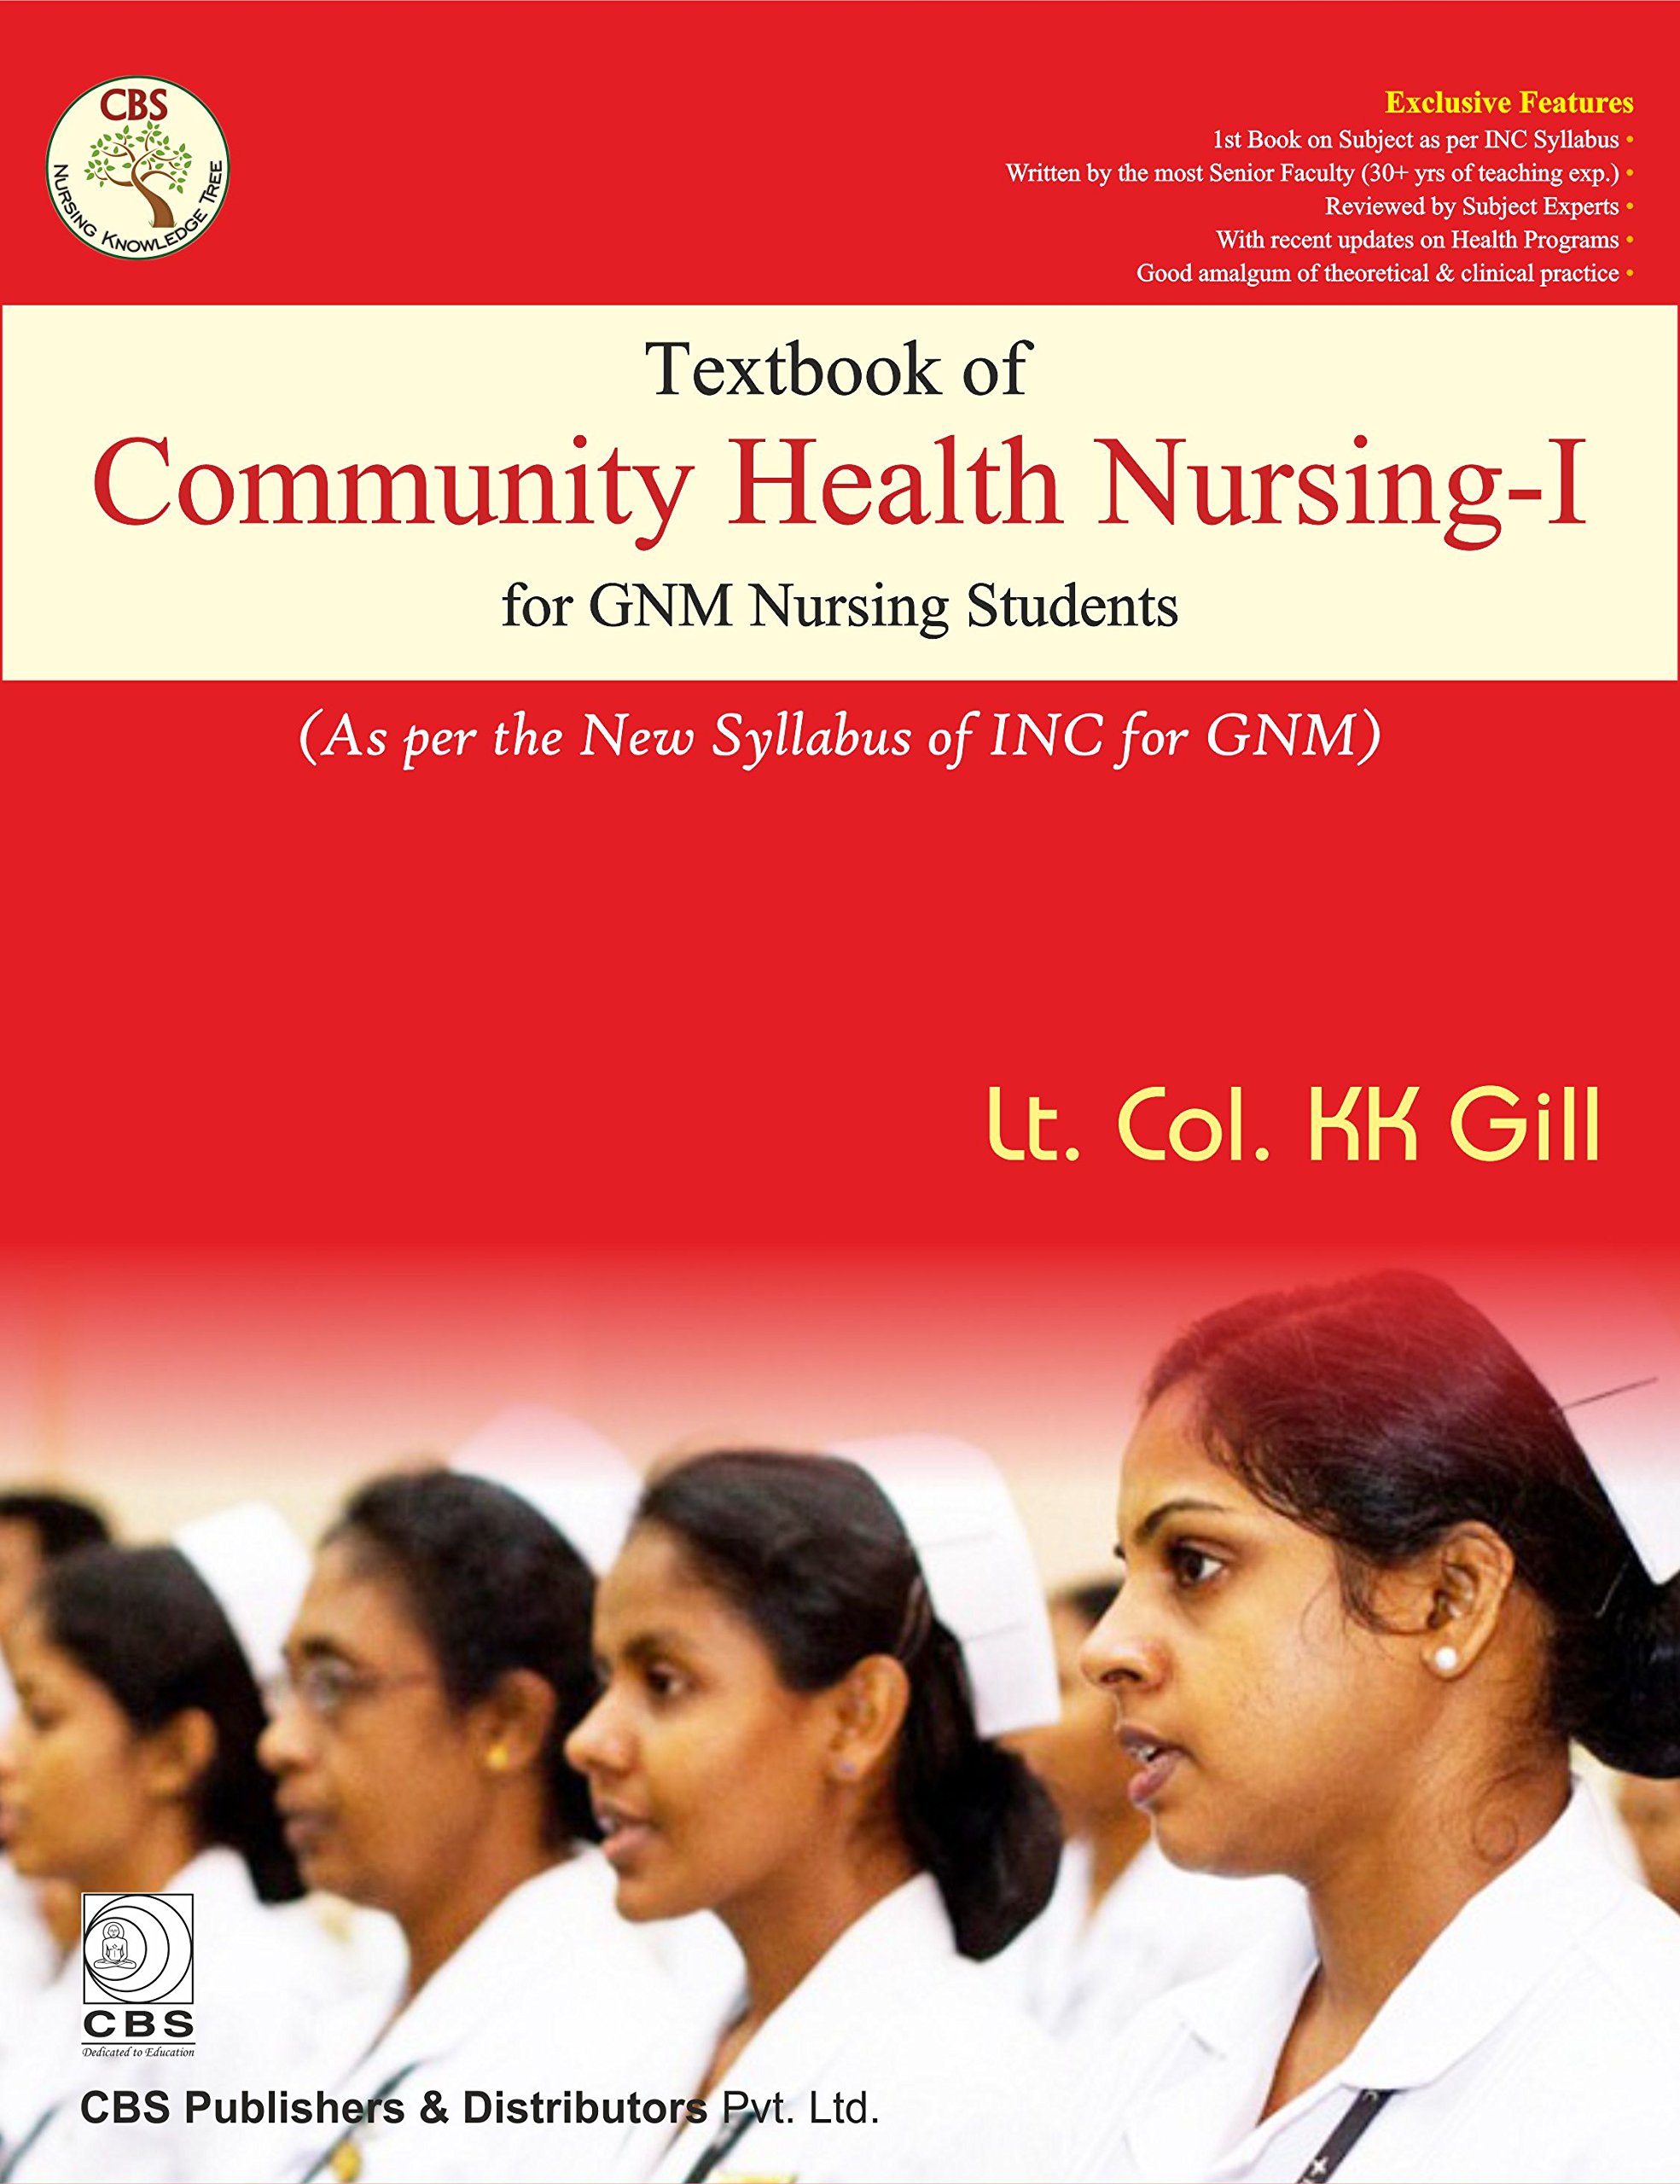 Textbook Of Community Health Nursing-I For Gnm Nursing Students (As Per The New Syllabus Of Inc For Gnm) (Pb)